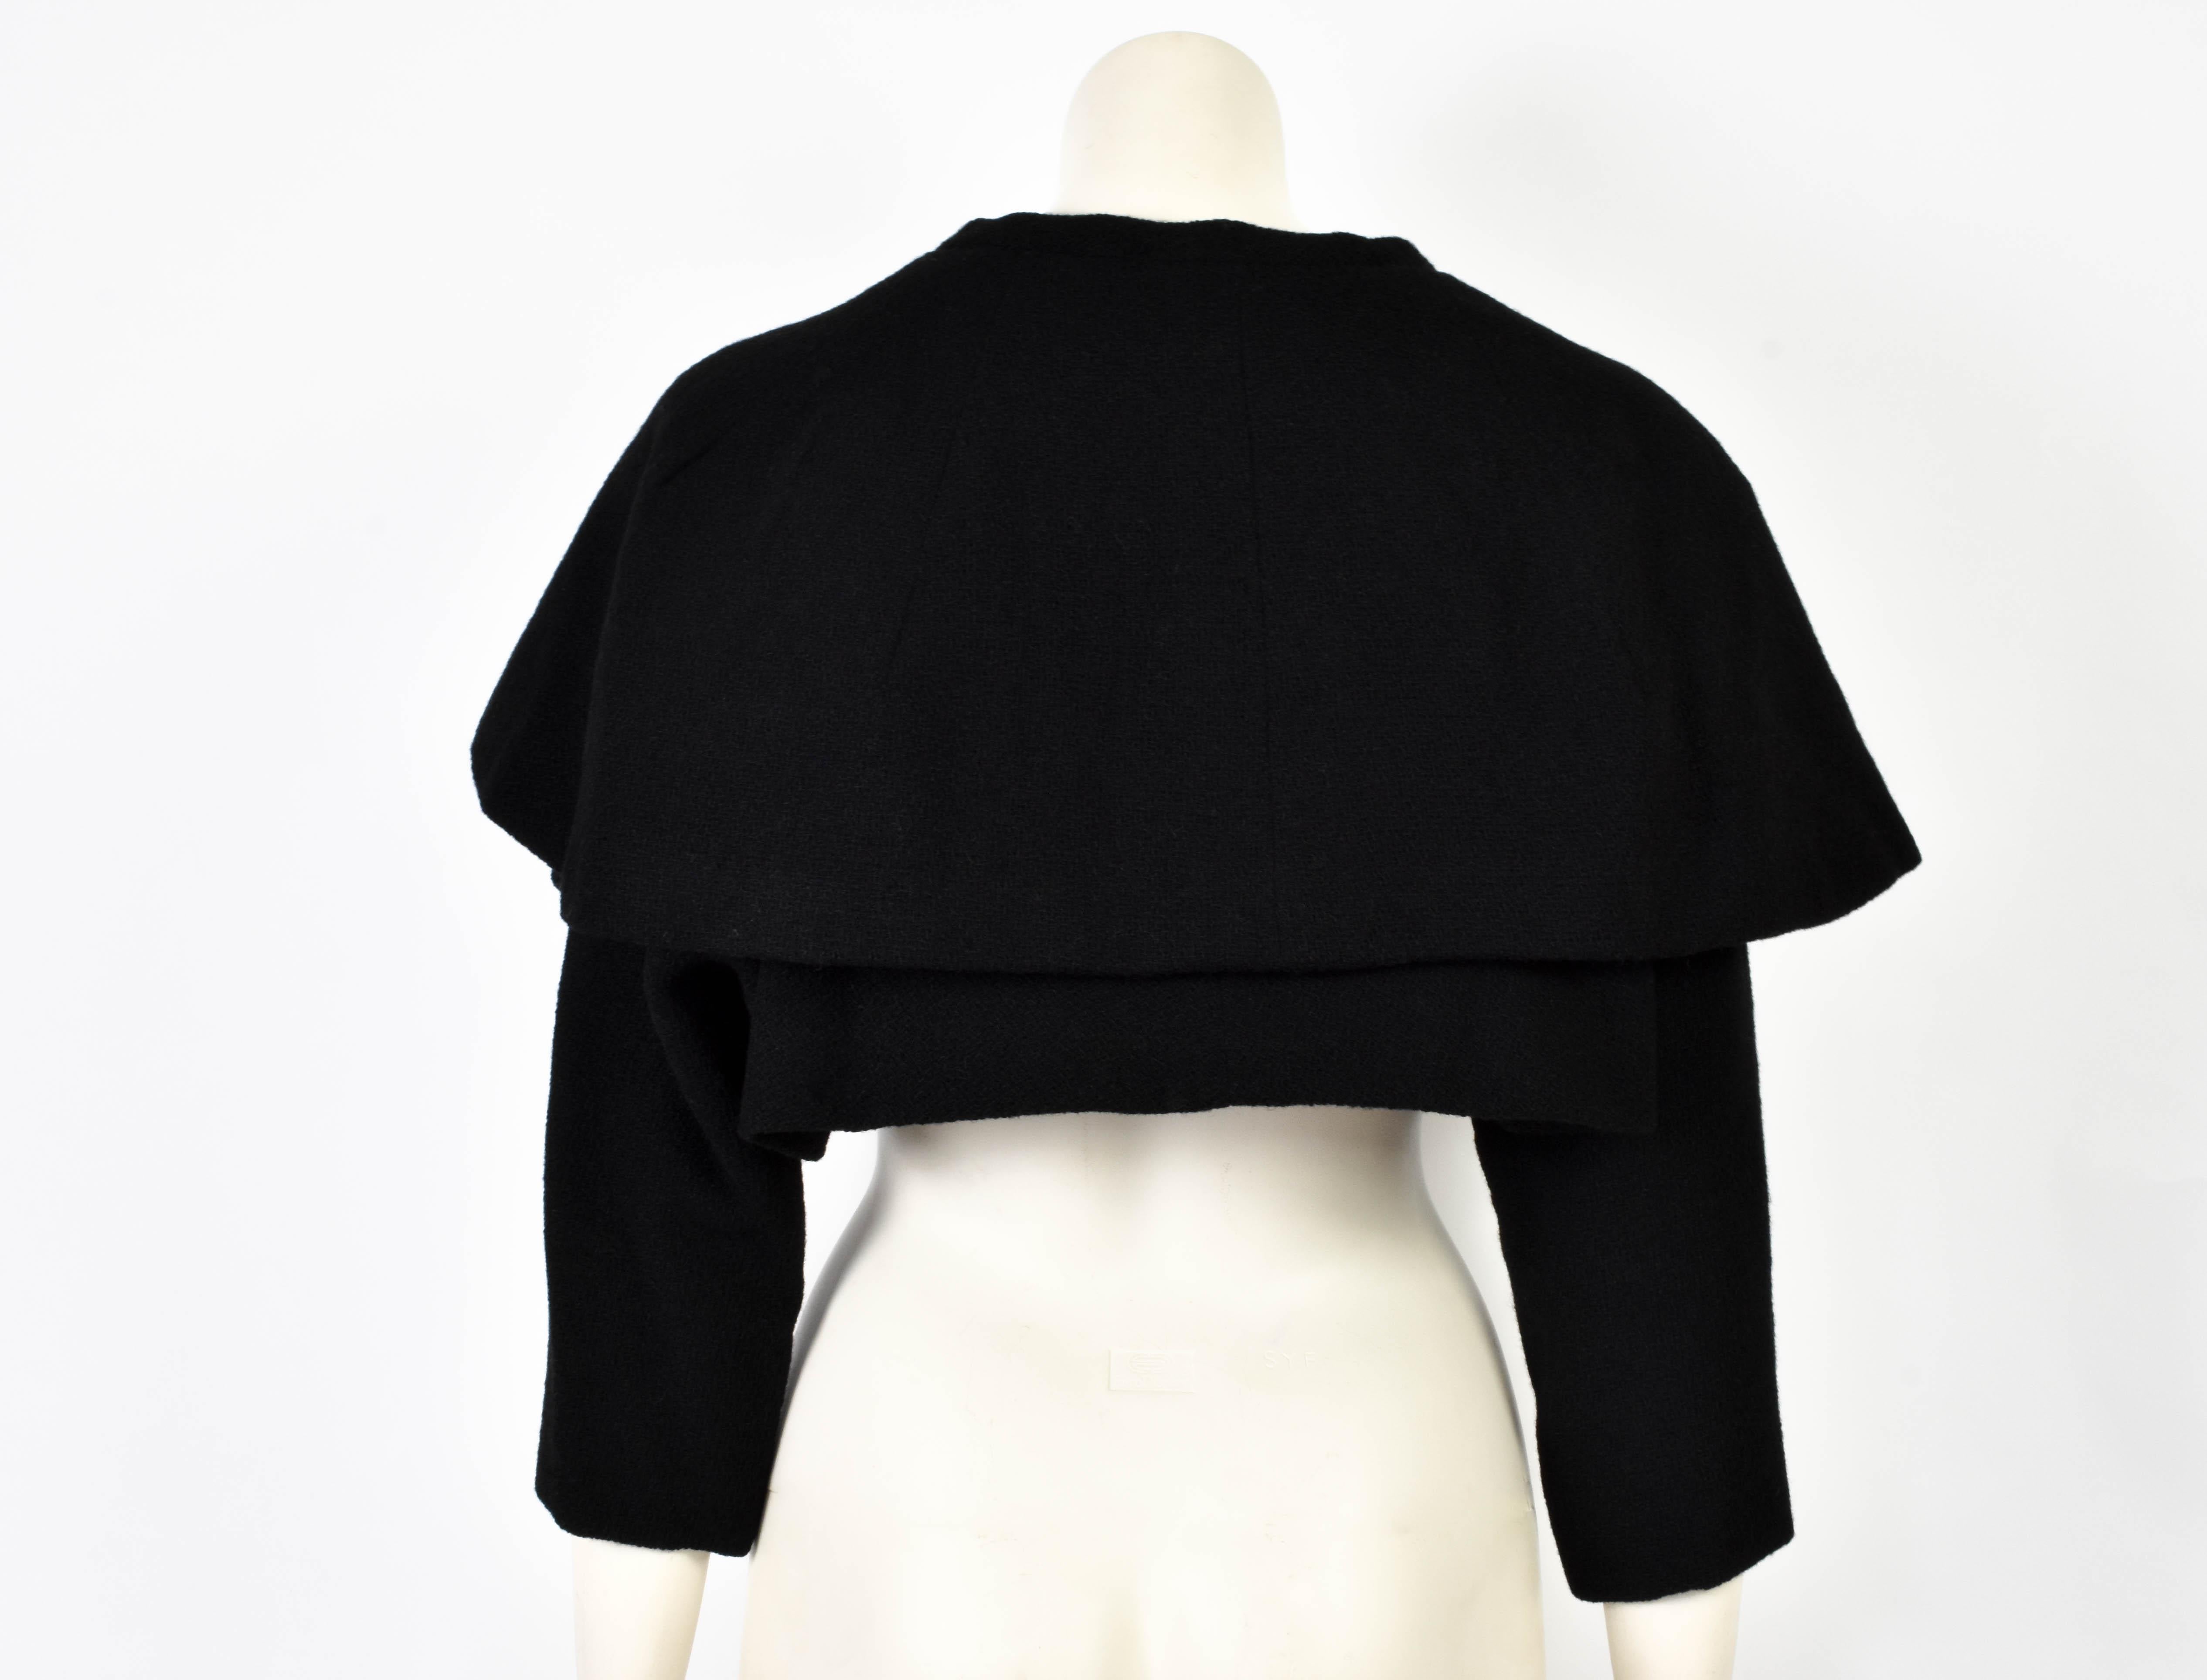 1950s Cristóbal Balenciaga Haute Couture Black Cape with Sleeves, Numbered 62289 1